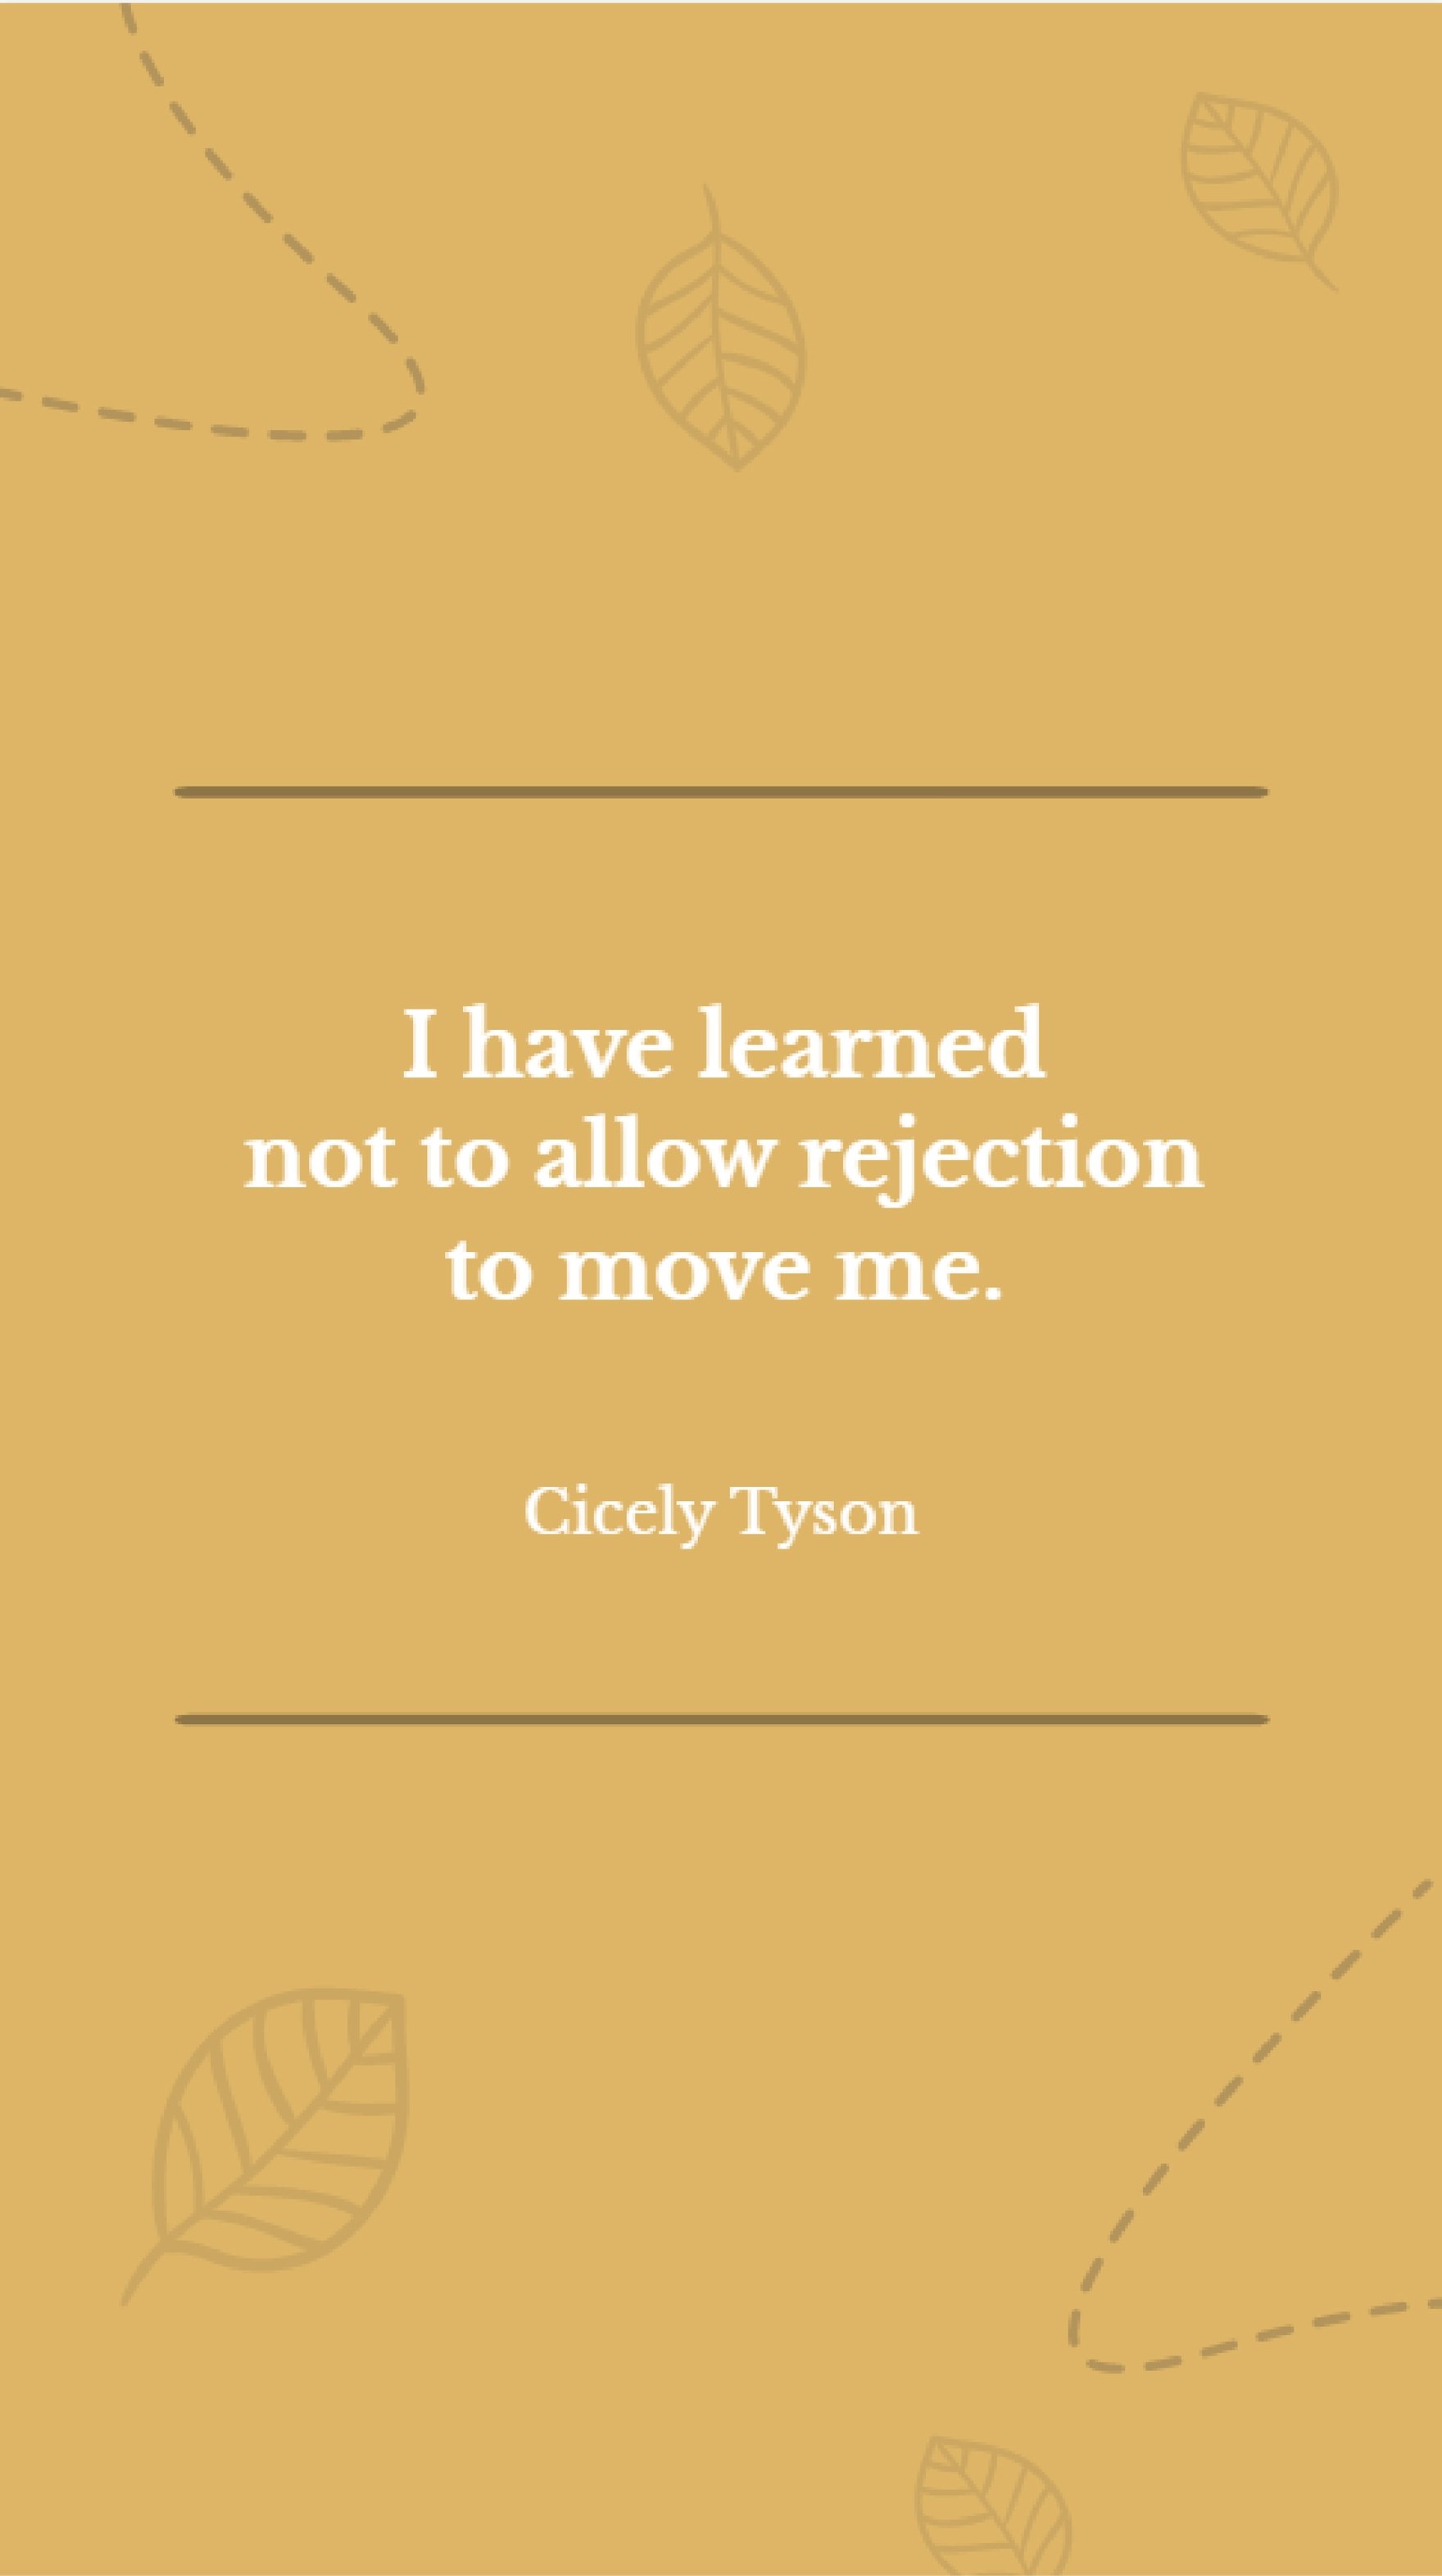 Cicely Tyson - I have learned not to allow rejection to move me